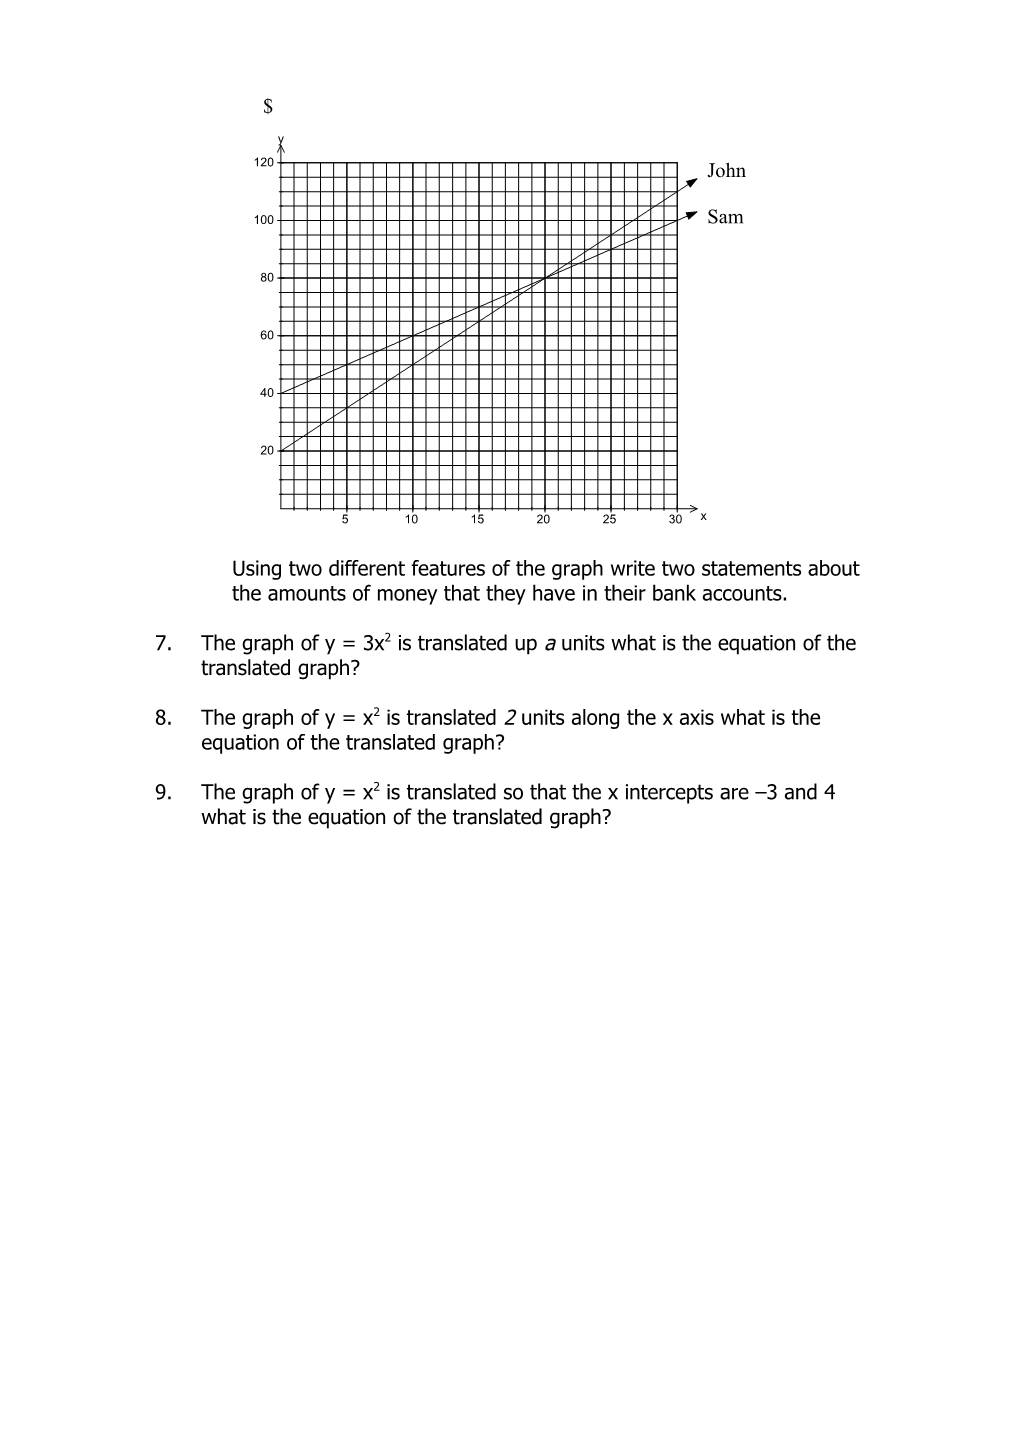 Examples of Assessment Questions for the Draft Mathematics CAS 1